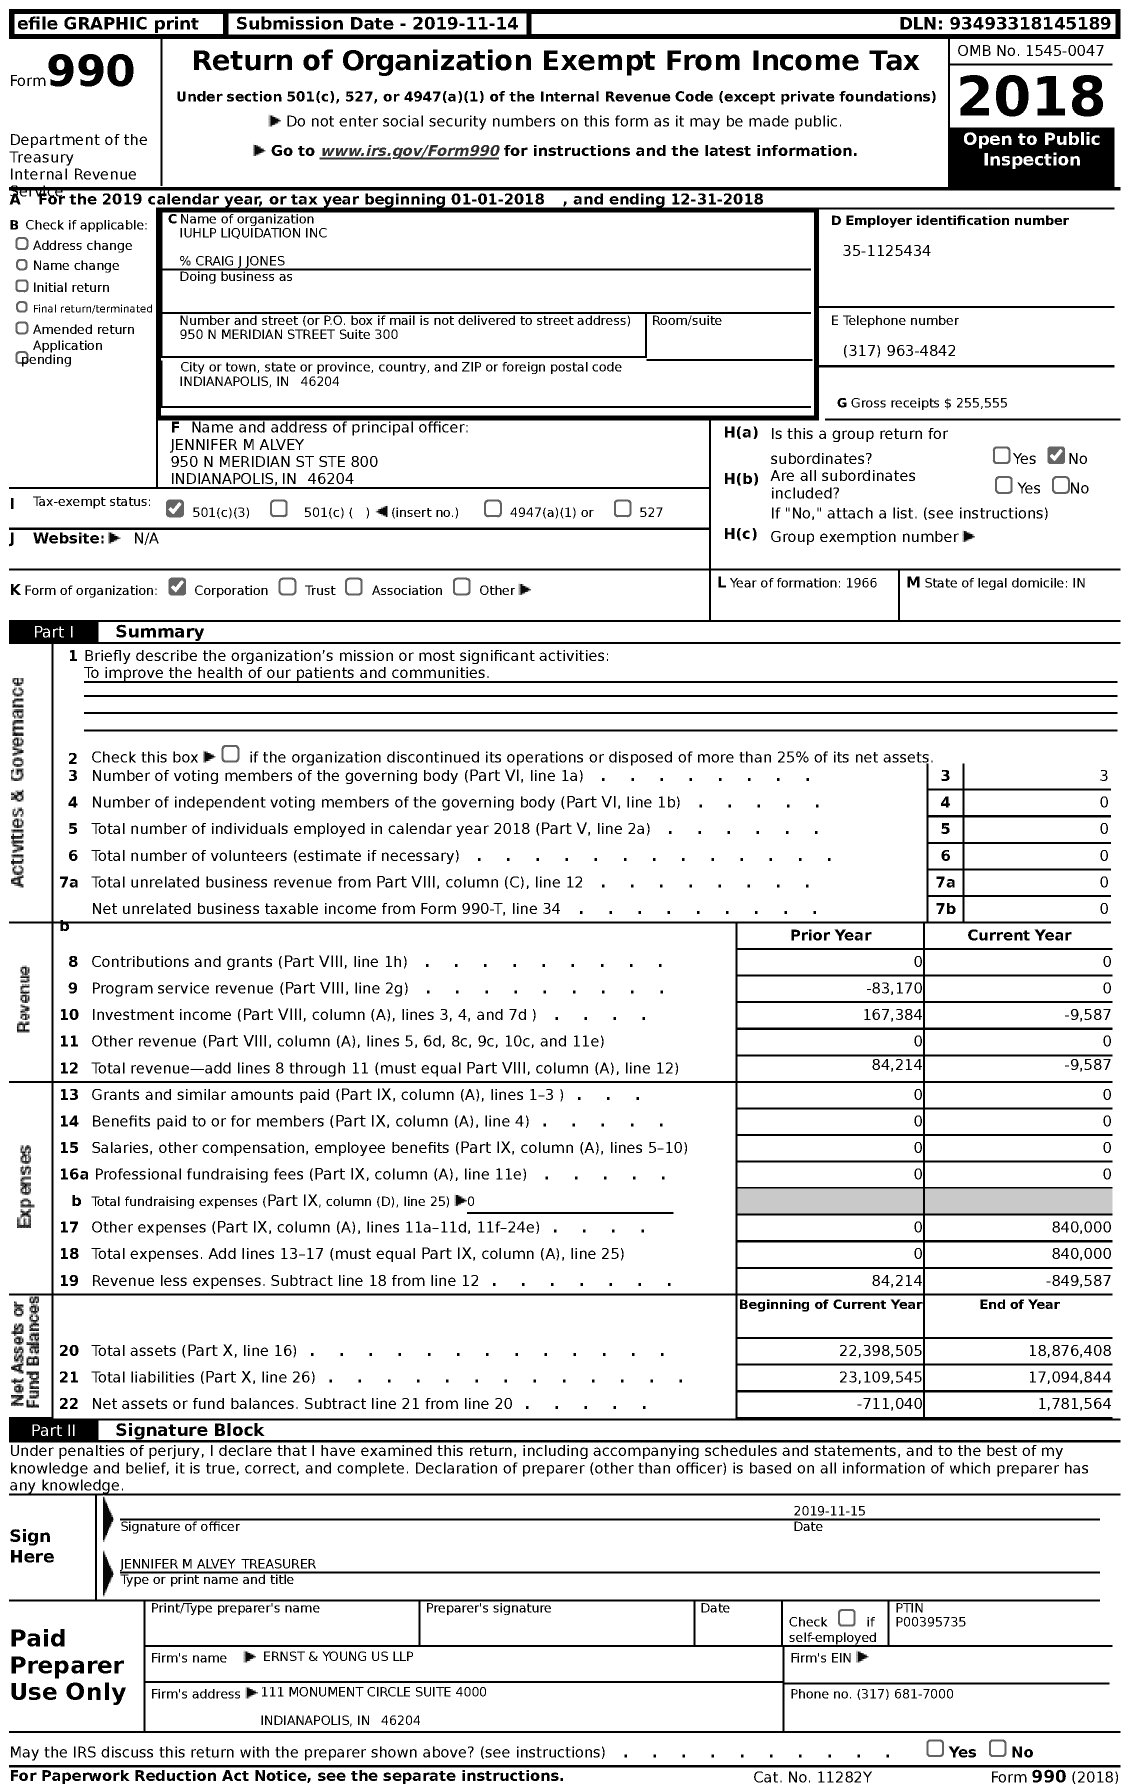 Image of first page of 2018 Form 990 for IUHLP Liquidation